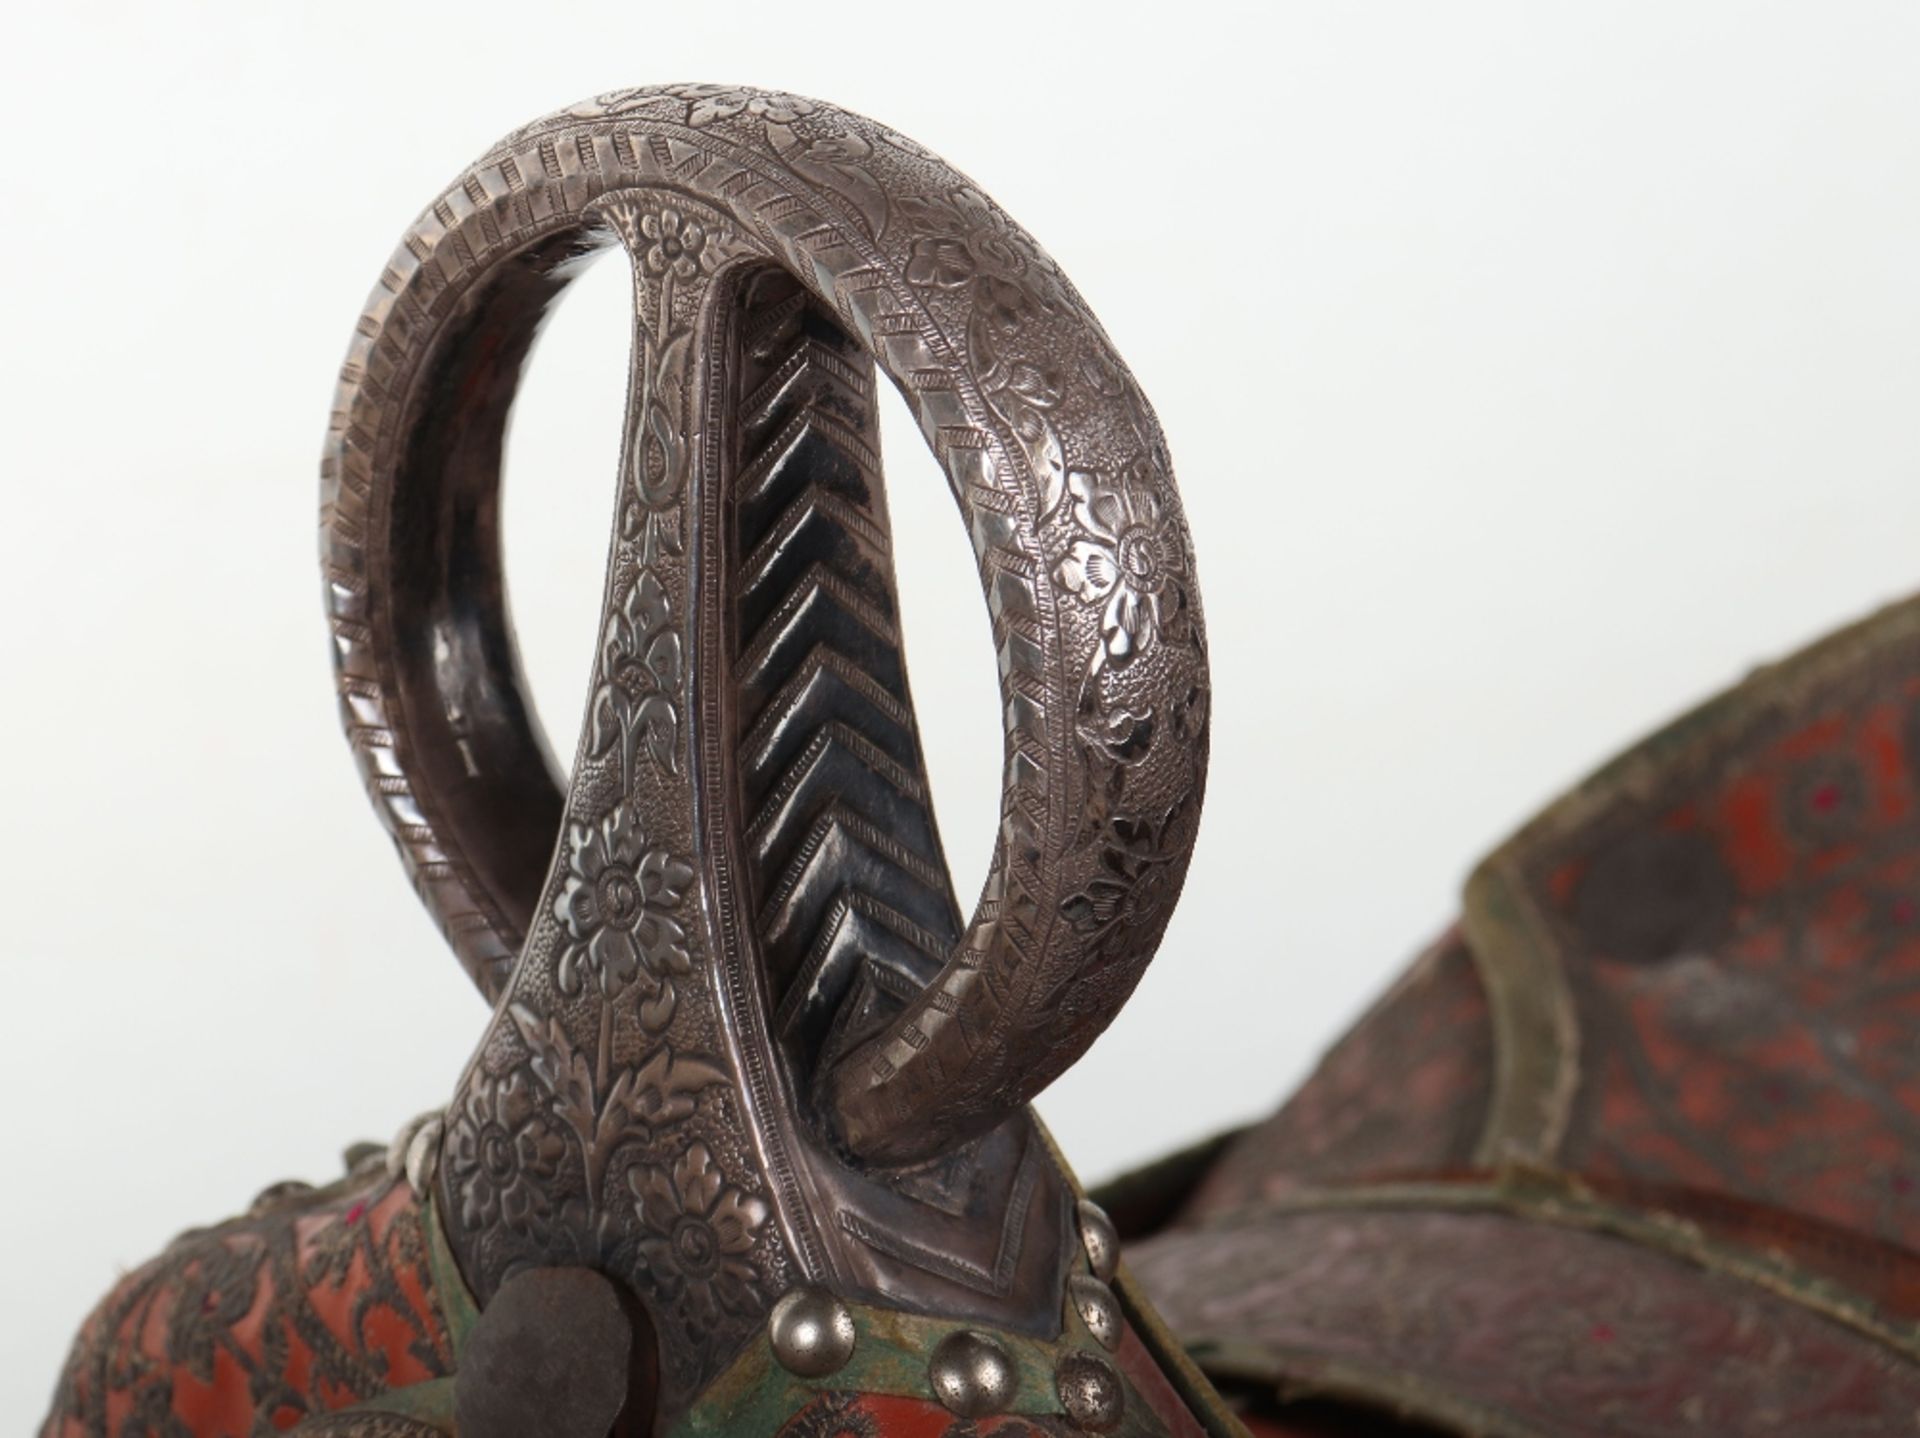 Fine and Scarce North Indian Saddle, Probably Late 19th or Early 20th Century - Image 3 of 12